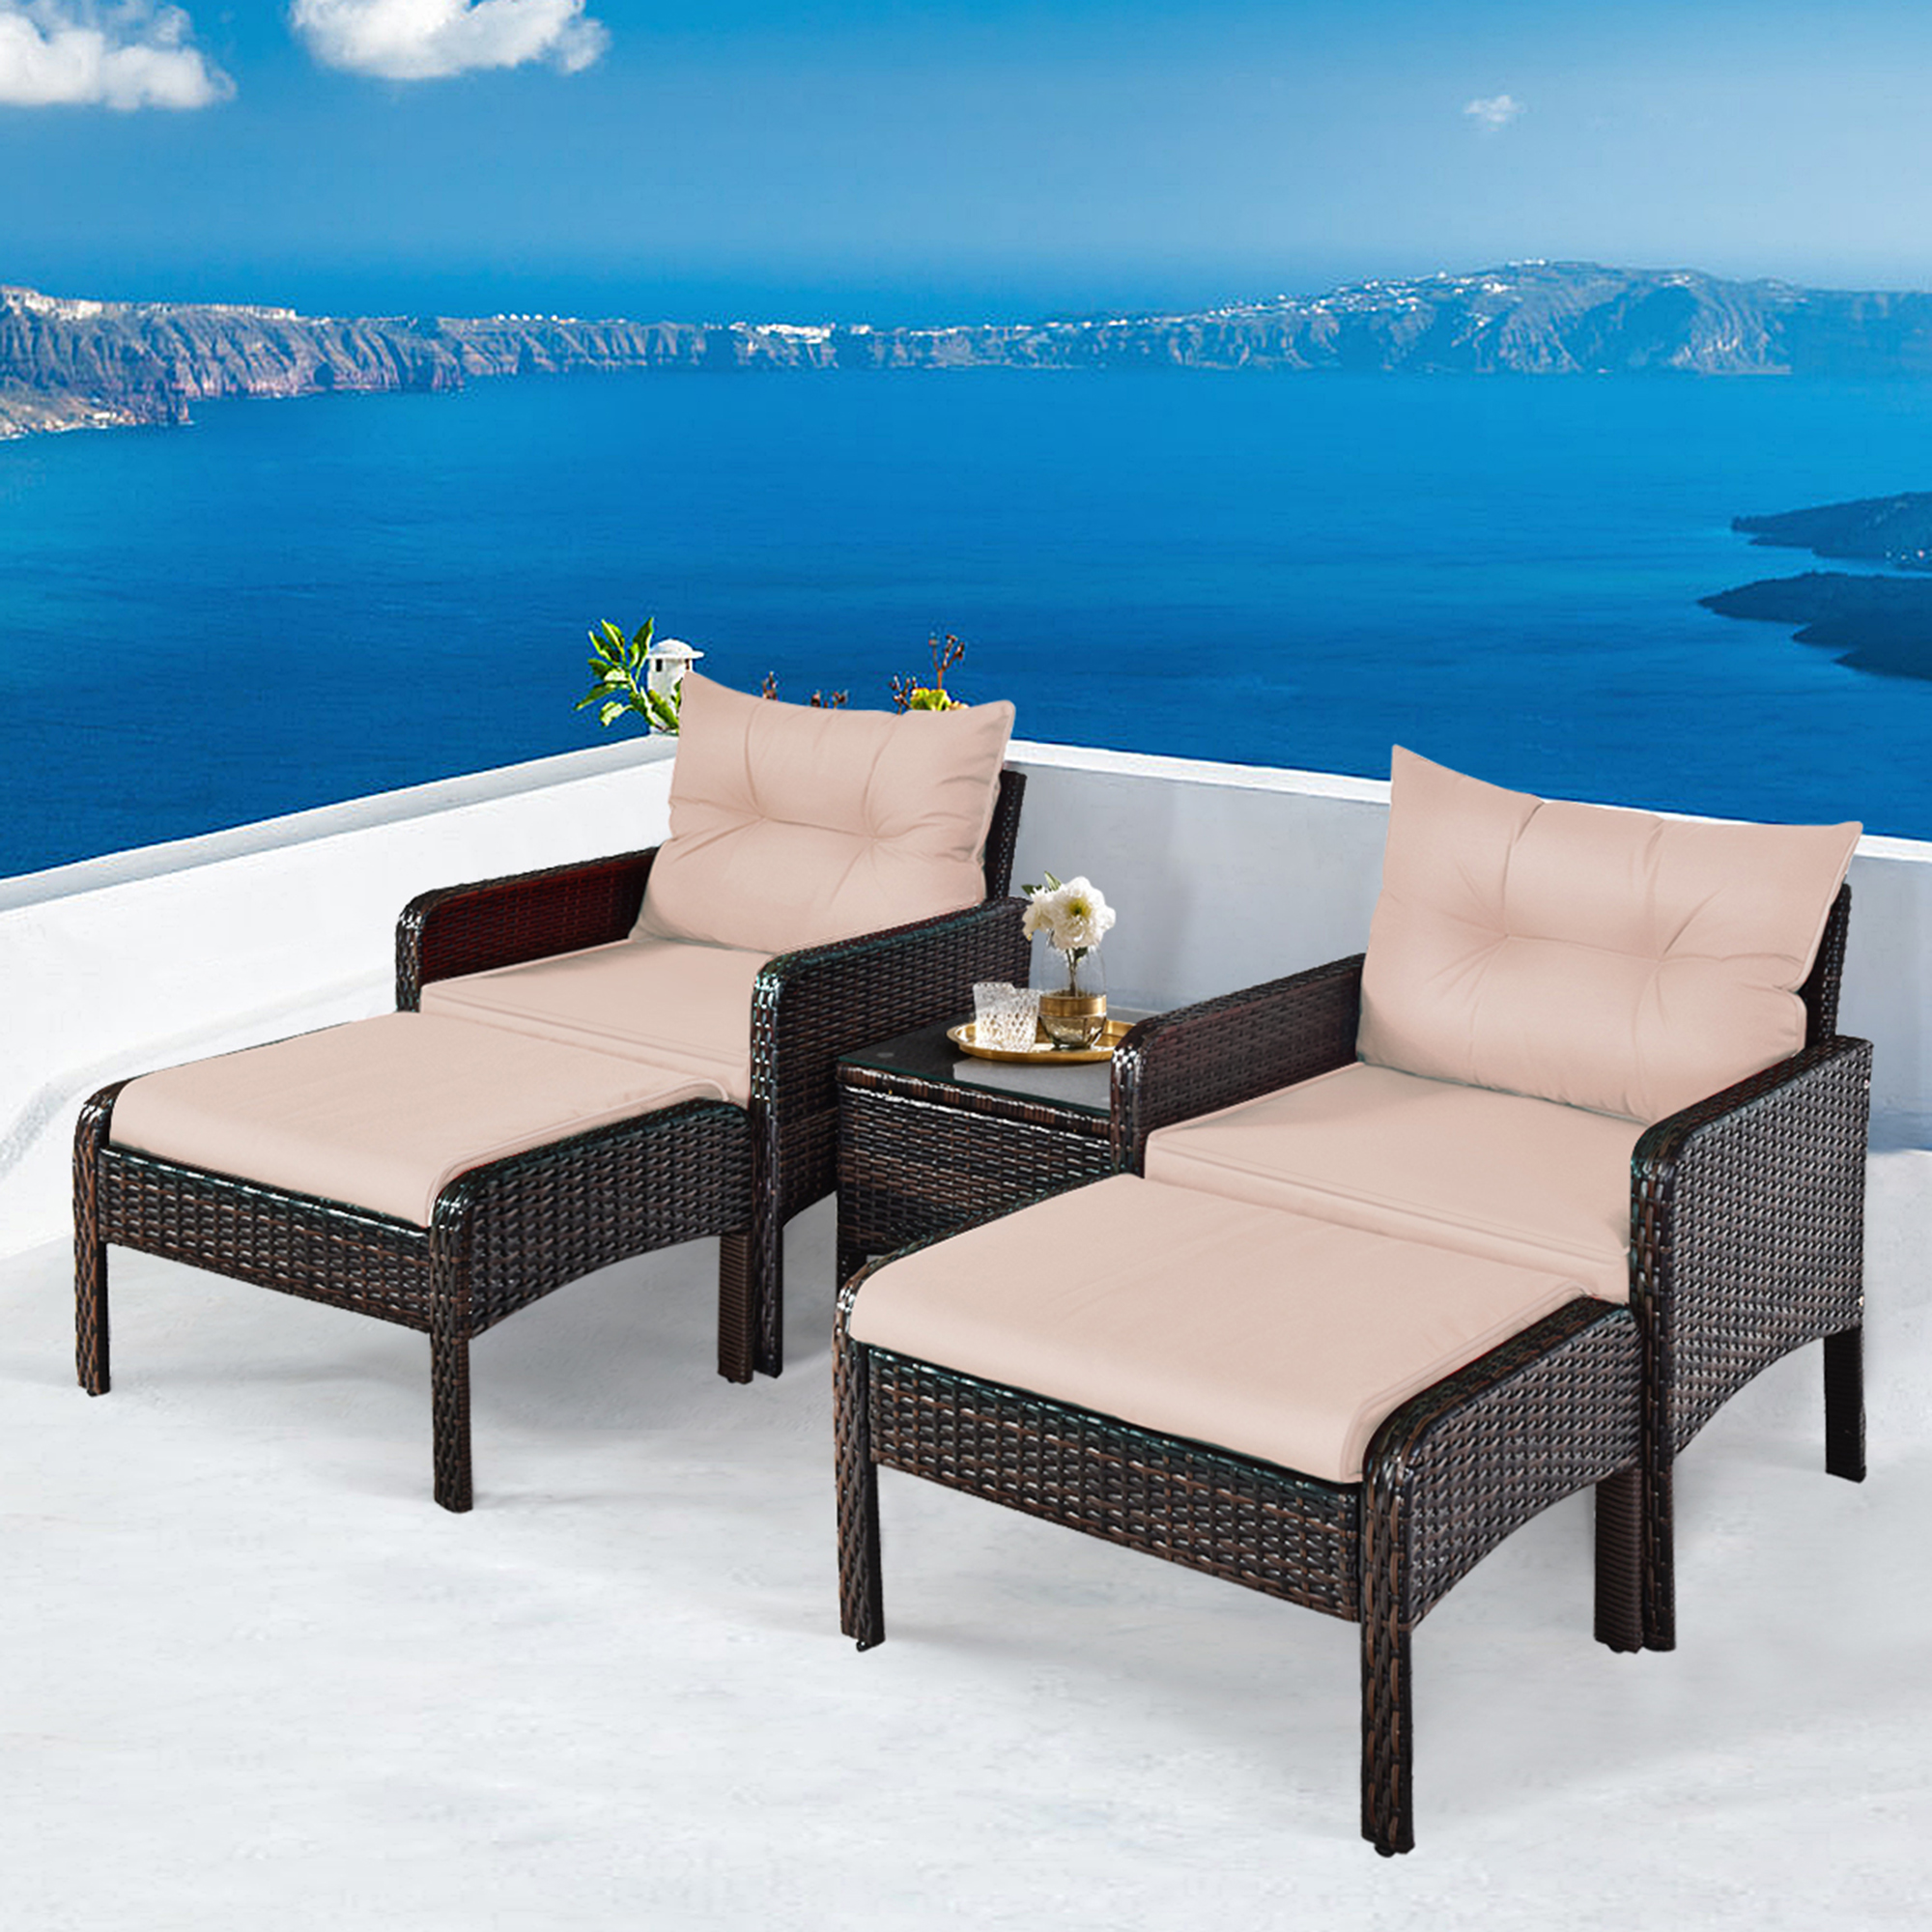 Gymax 5 PC Patio Set Sectional Rattan Wicker Furniture Set Home Outdoor - image 1 of 10